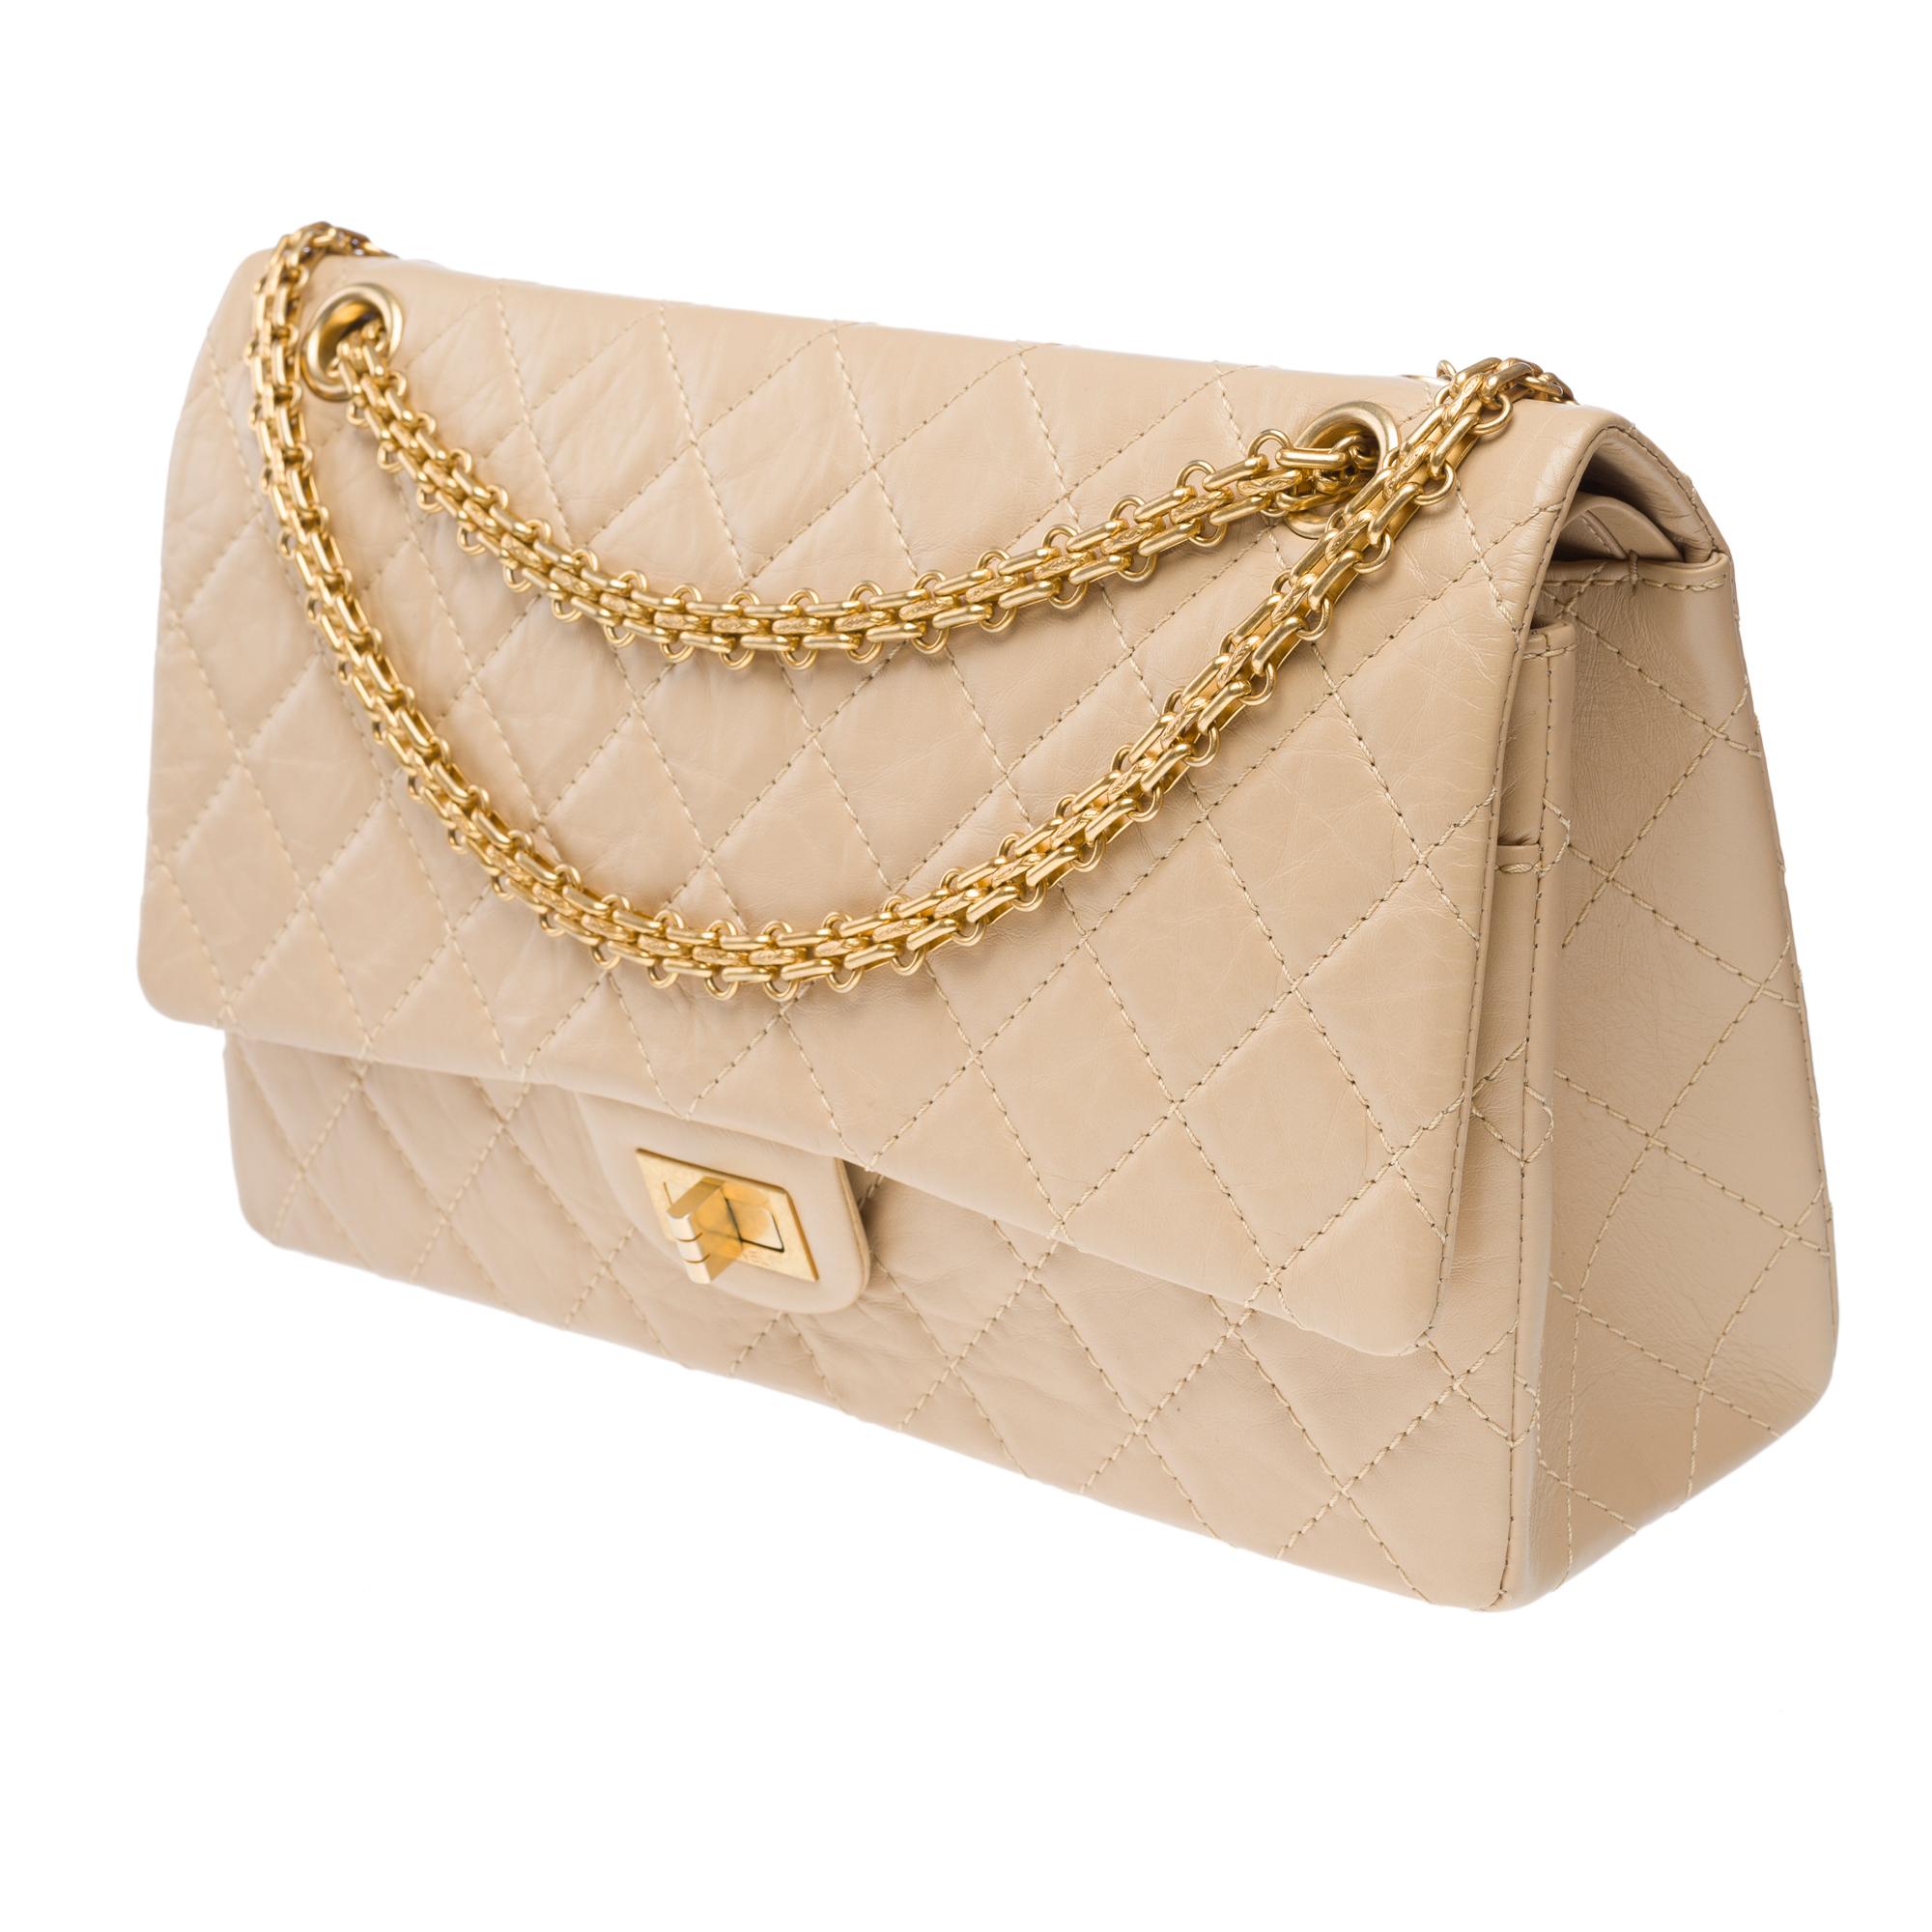 Iconic Chanel 2.55 double flap shoulder bag in quilted beige leather, GHW For Sale 2